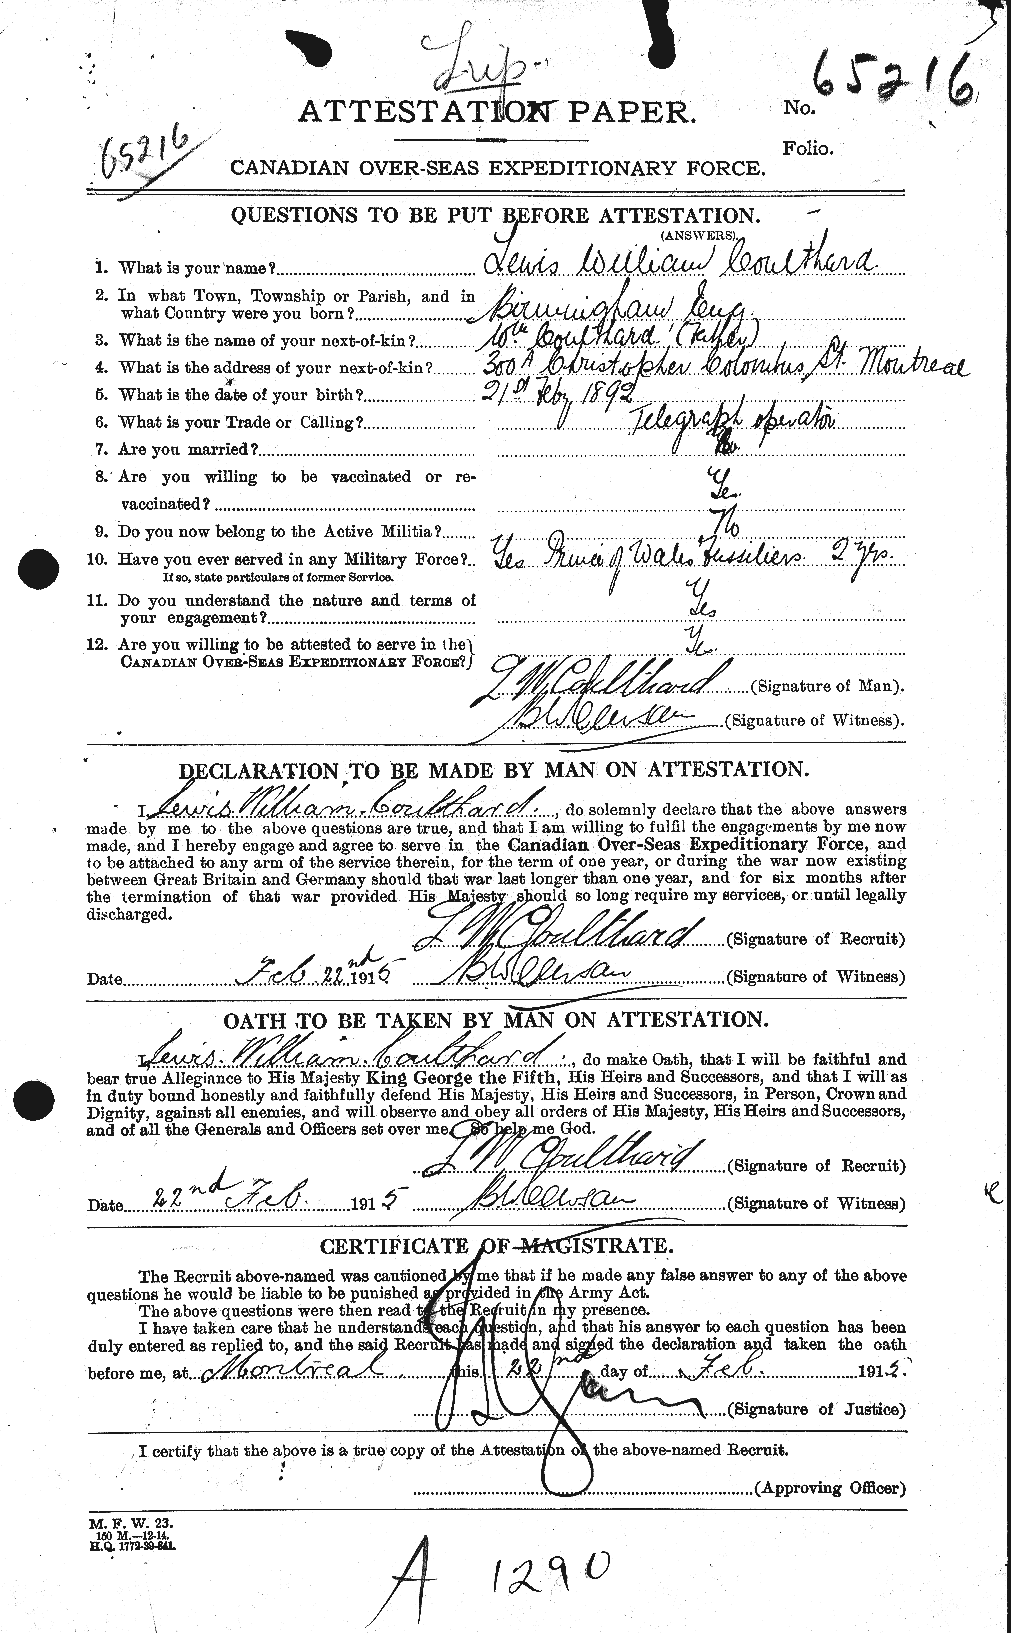 Personnel Records of the First World War - CEF 057881a